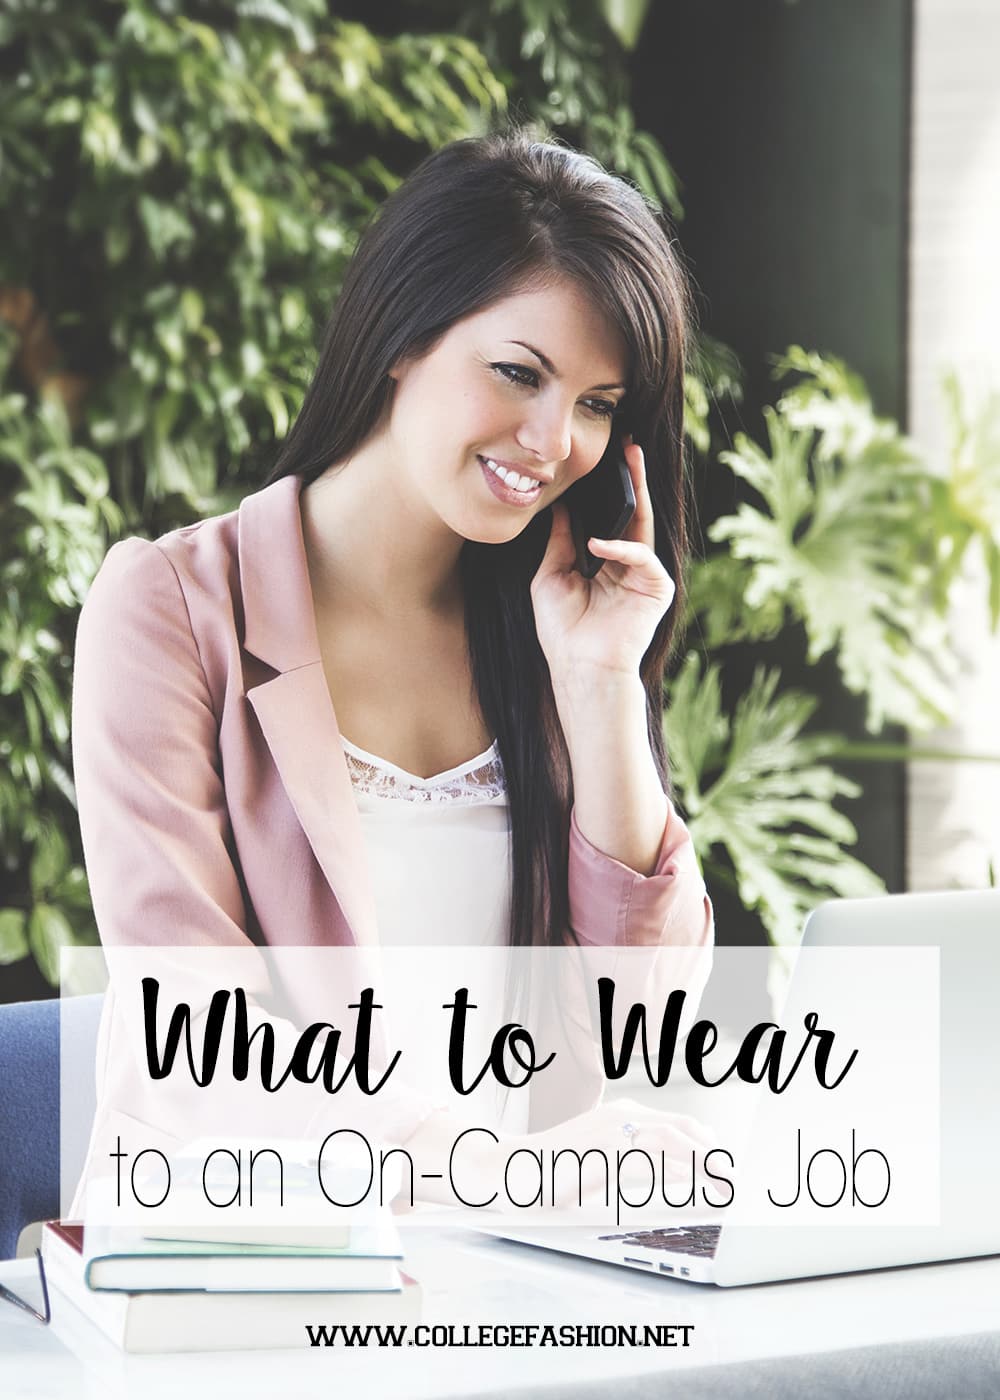 What to wear to an on-campus job - outfit ideas and tips